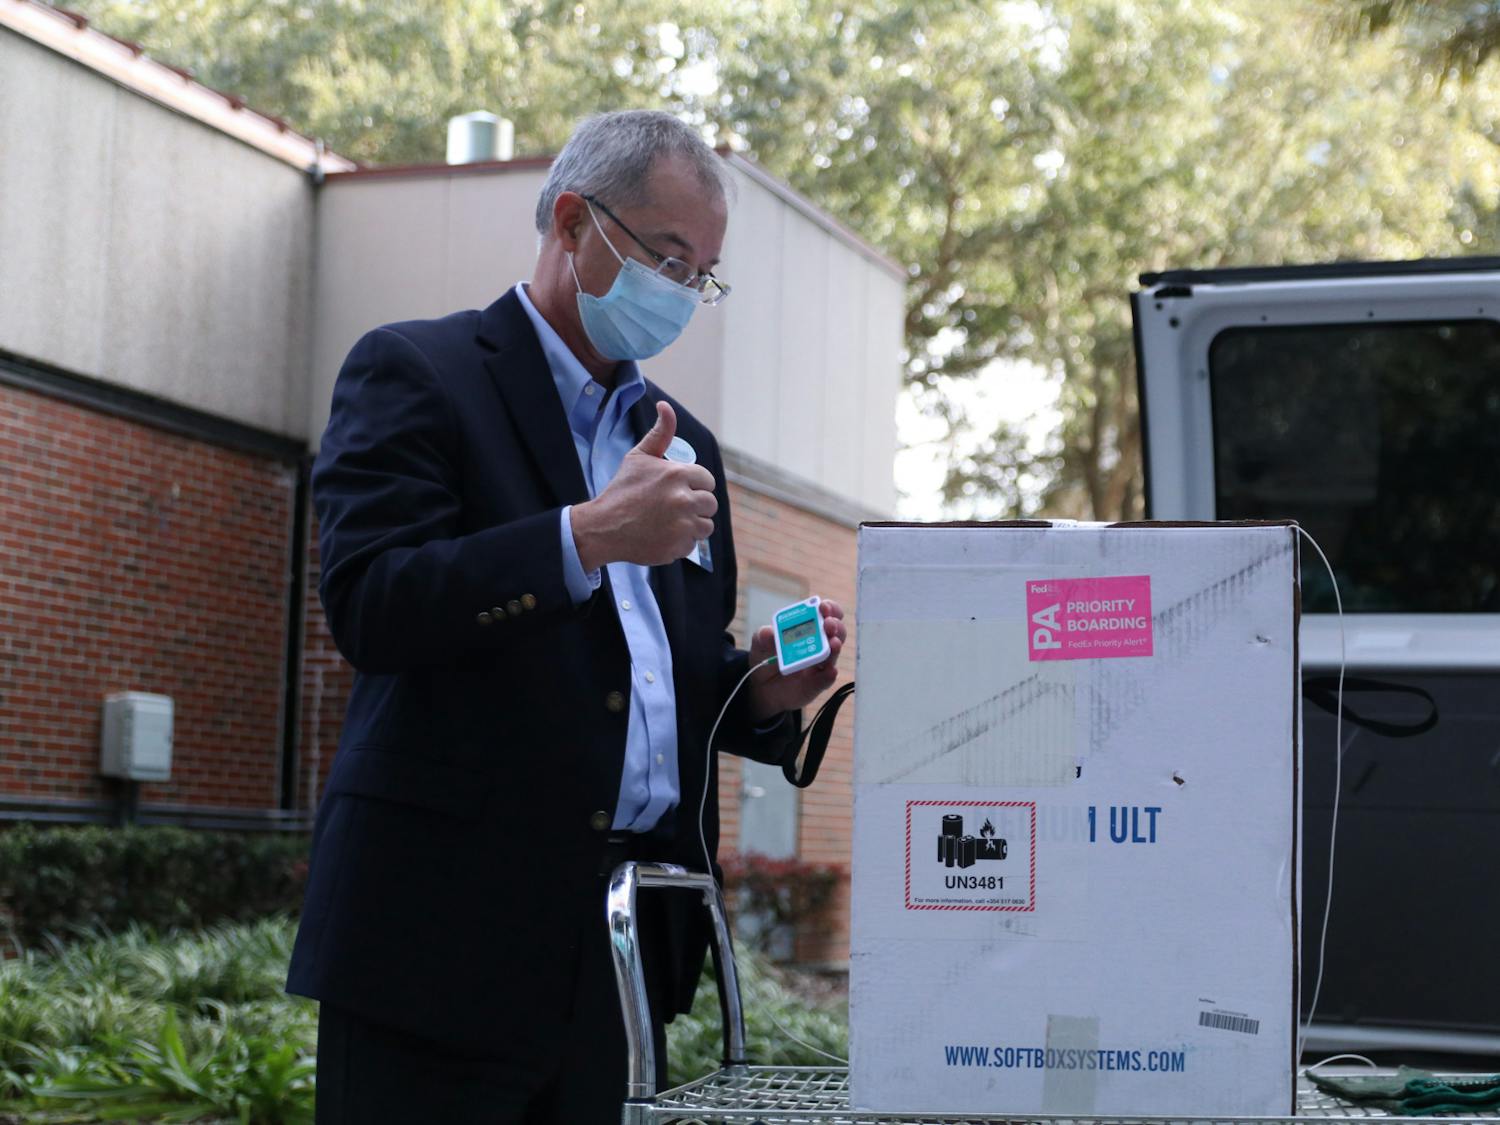 Thomas Johns, Director of Pharmacy Services at UF, gives a thumbs up after displaying the thermometer to the press. The Pfizer-BioNTech COVID-19 vaccine has to be stored at ultracold temperatures.